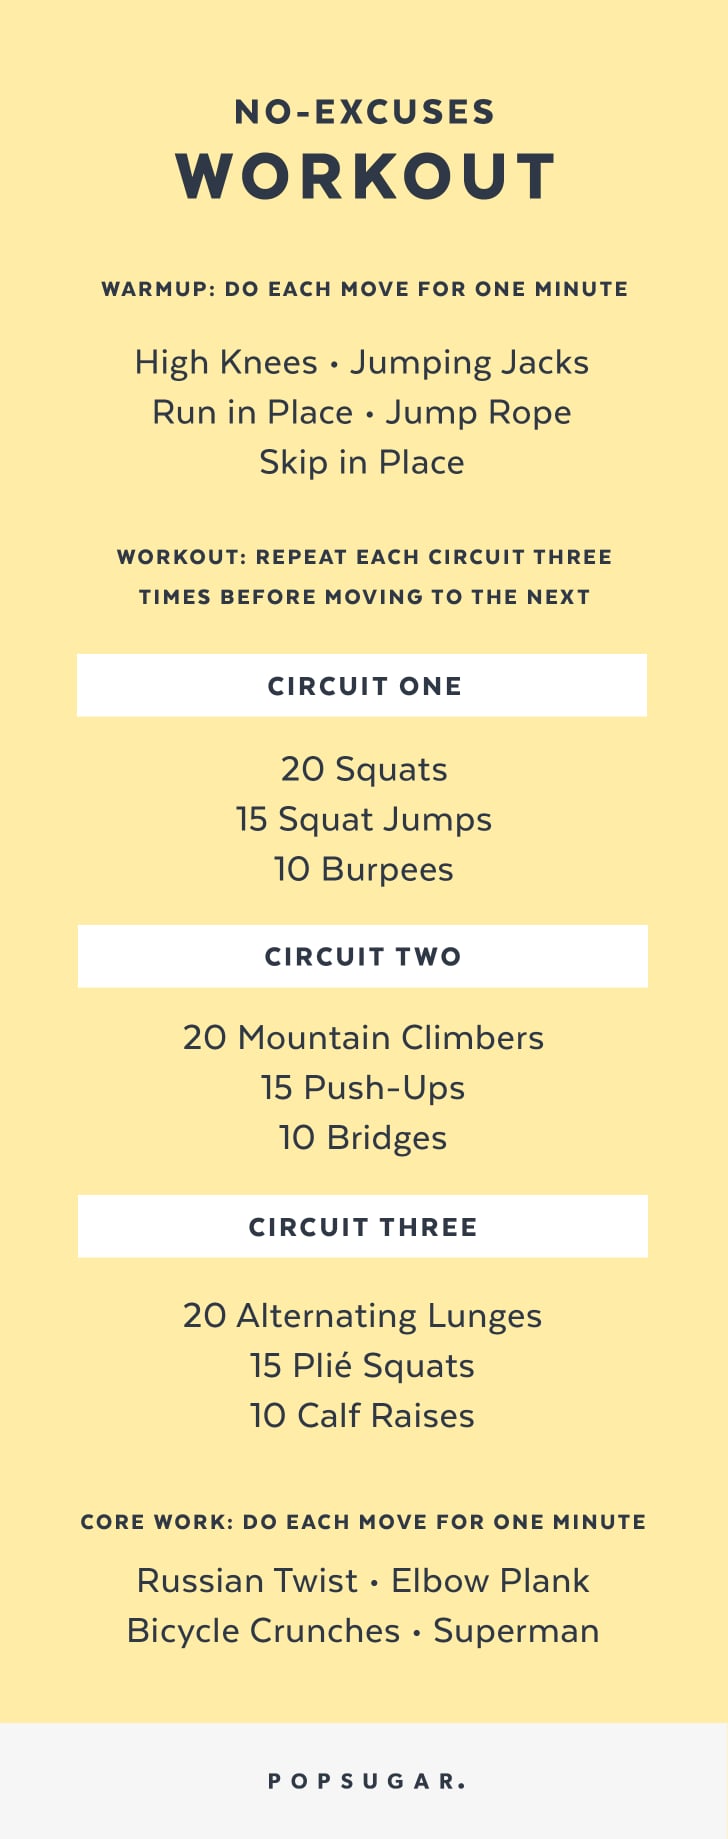 No-Excuses Workout